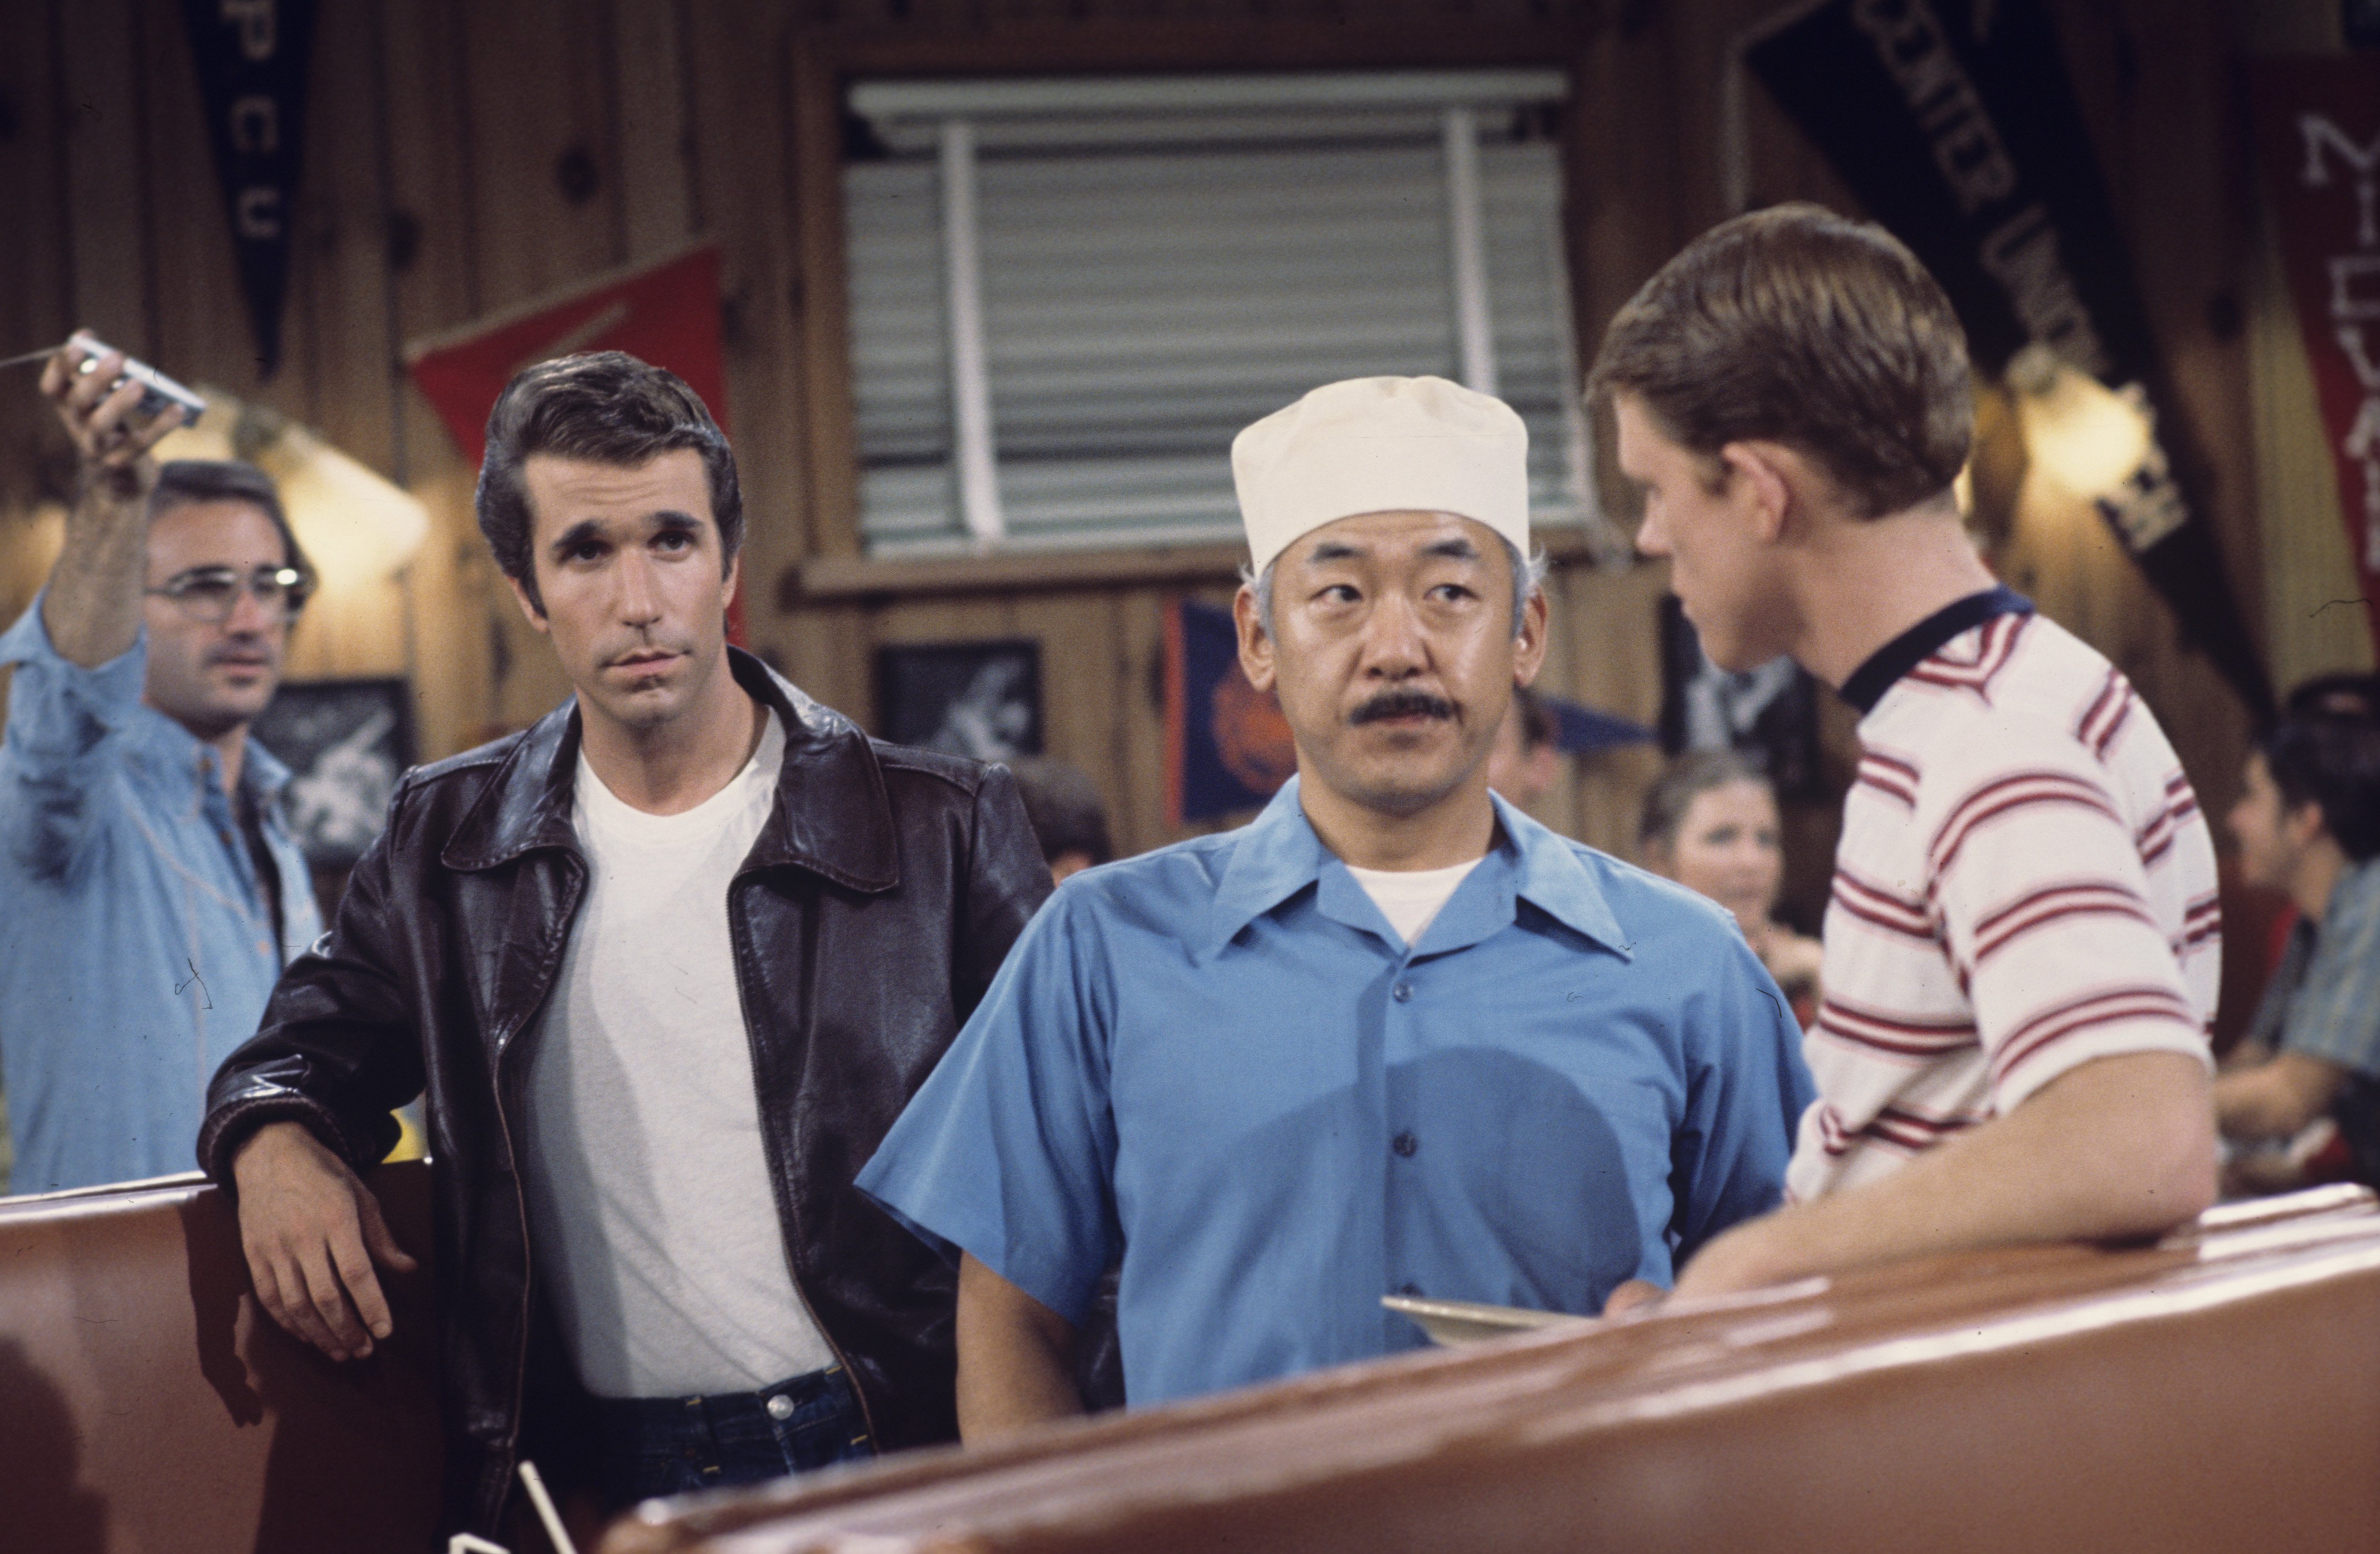 Pat Morita as Matsuo "Arnold" Takahashi alongside Henry Winkler as Fonzie in "Happy Days" on October 10, 1975. / Source: Getty Images